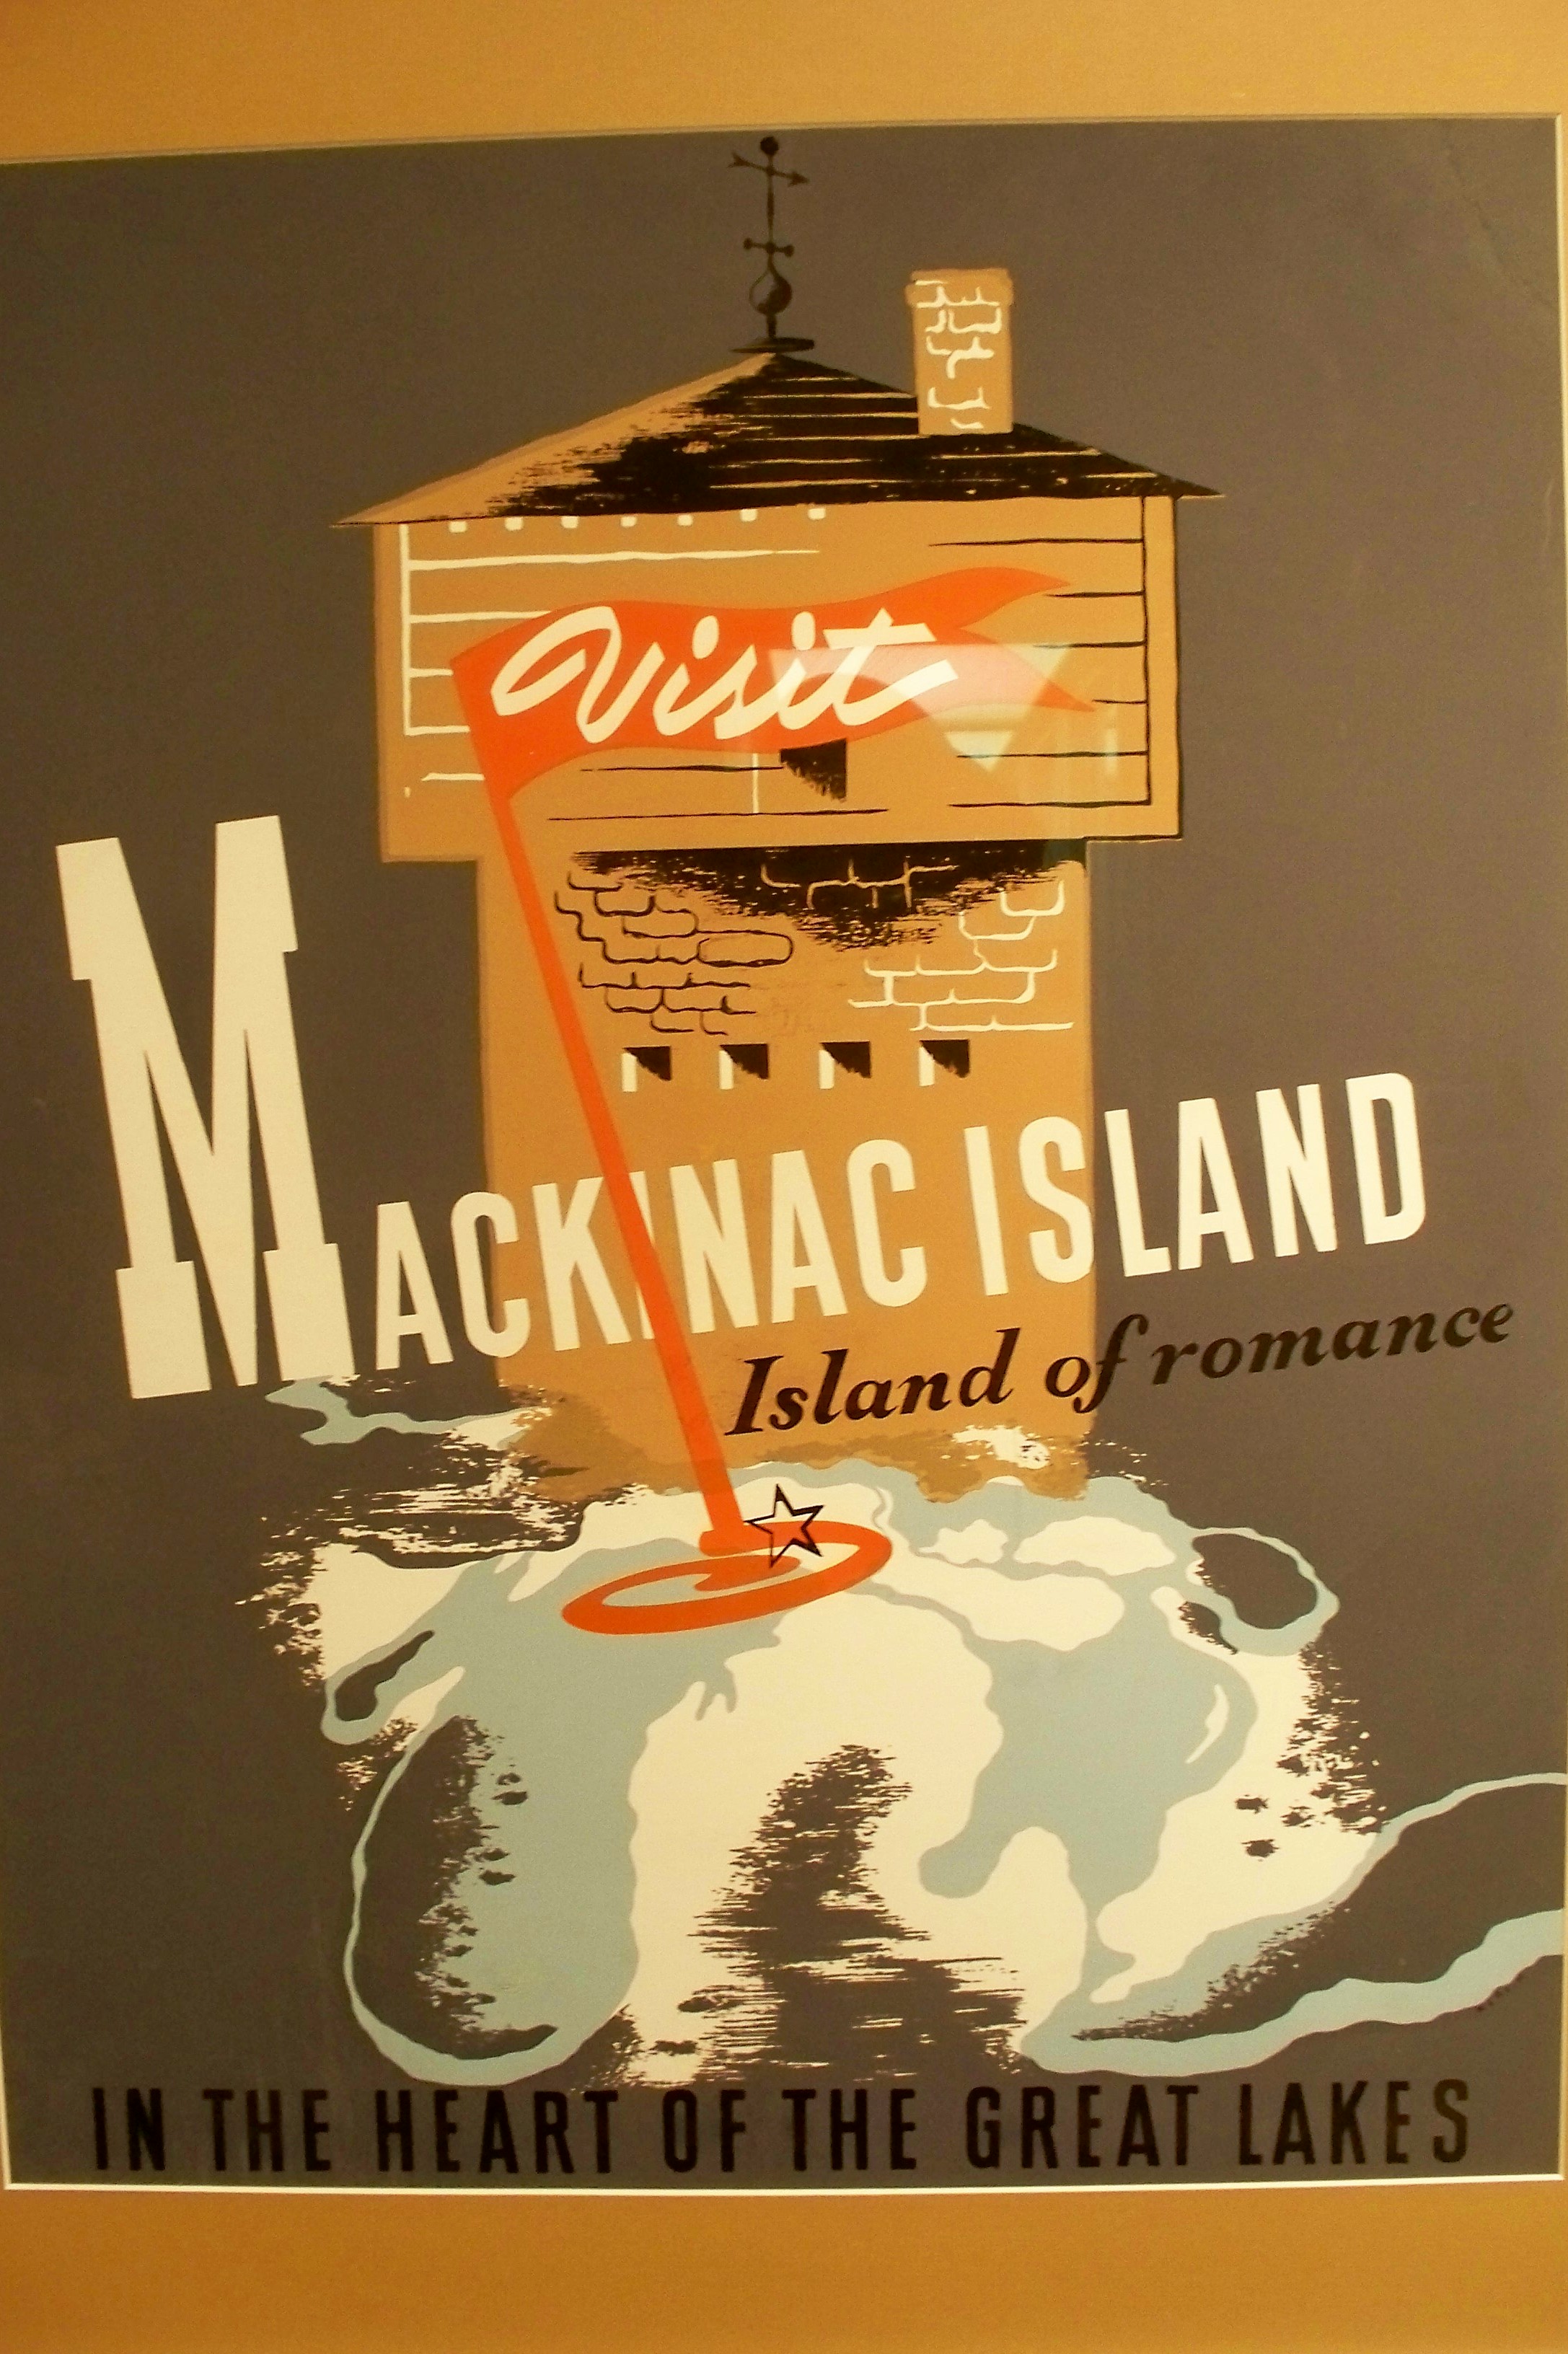 This classic 50's poster spotlights the island's location in the middle of the Great Lakes.